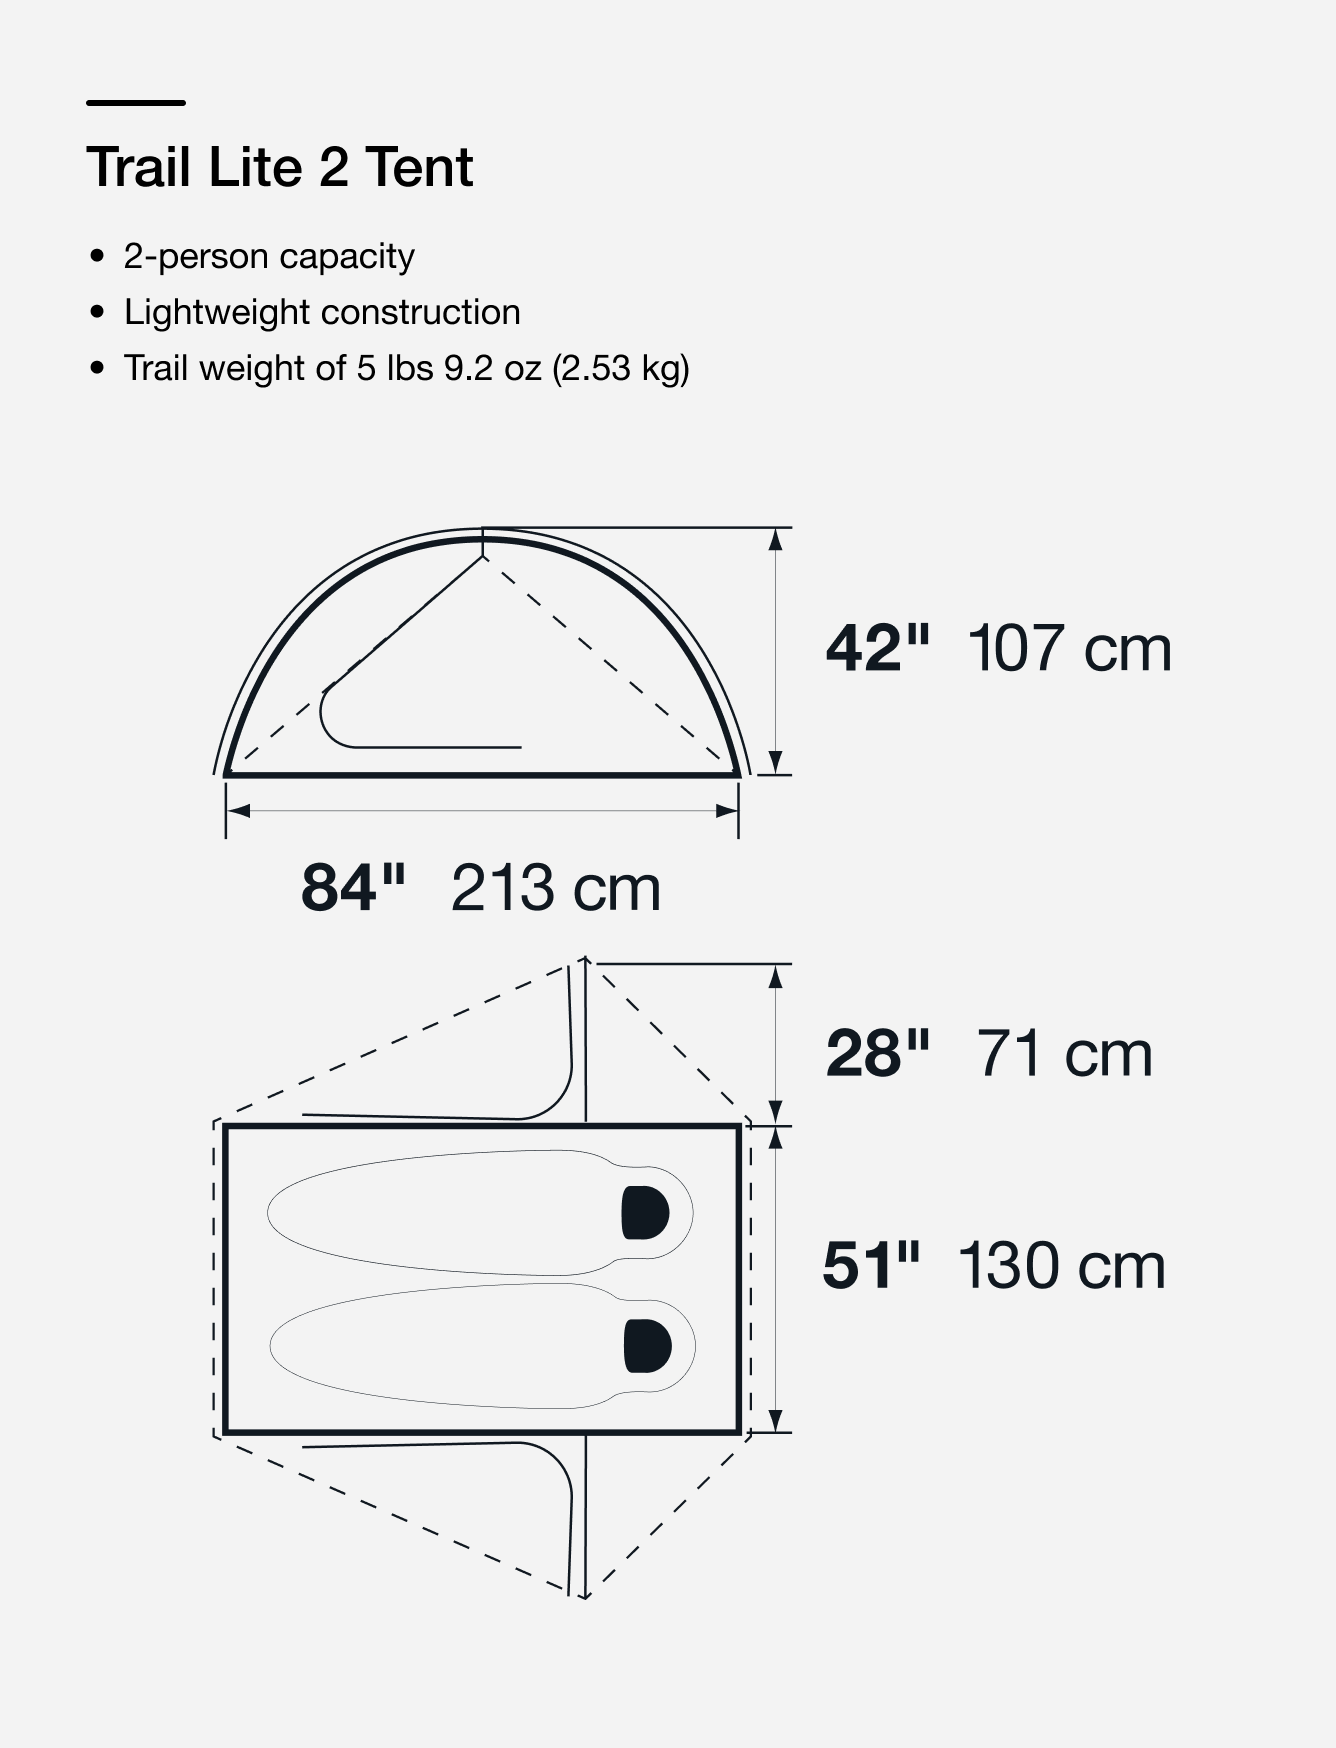 Product imagery of the Trail Lite Tent from The North Face with features called out in text overlay. 